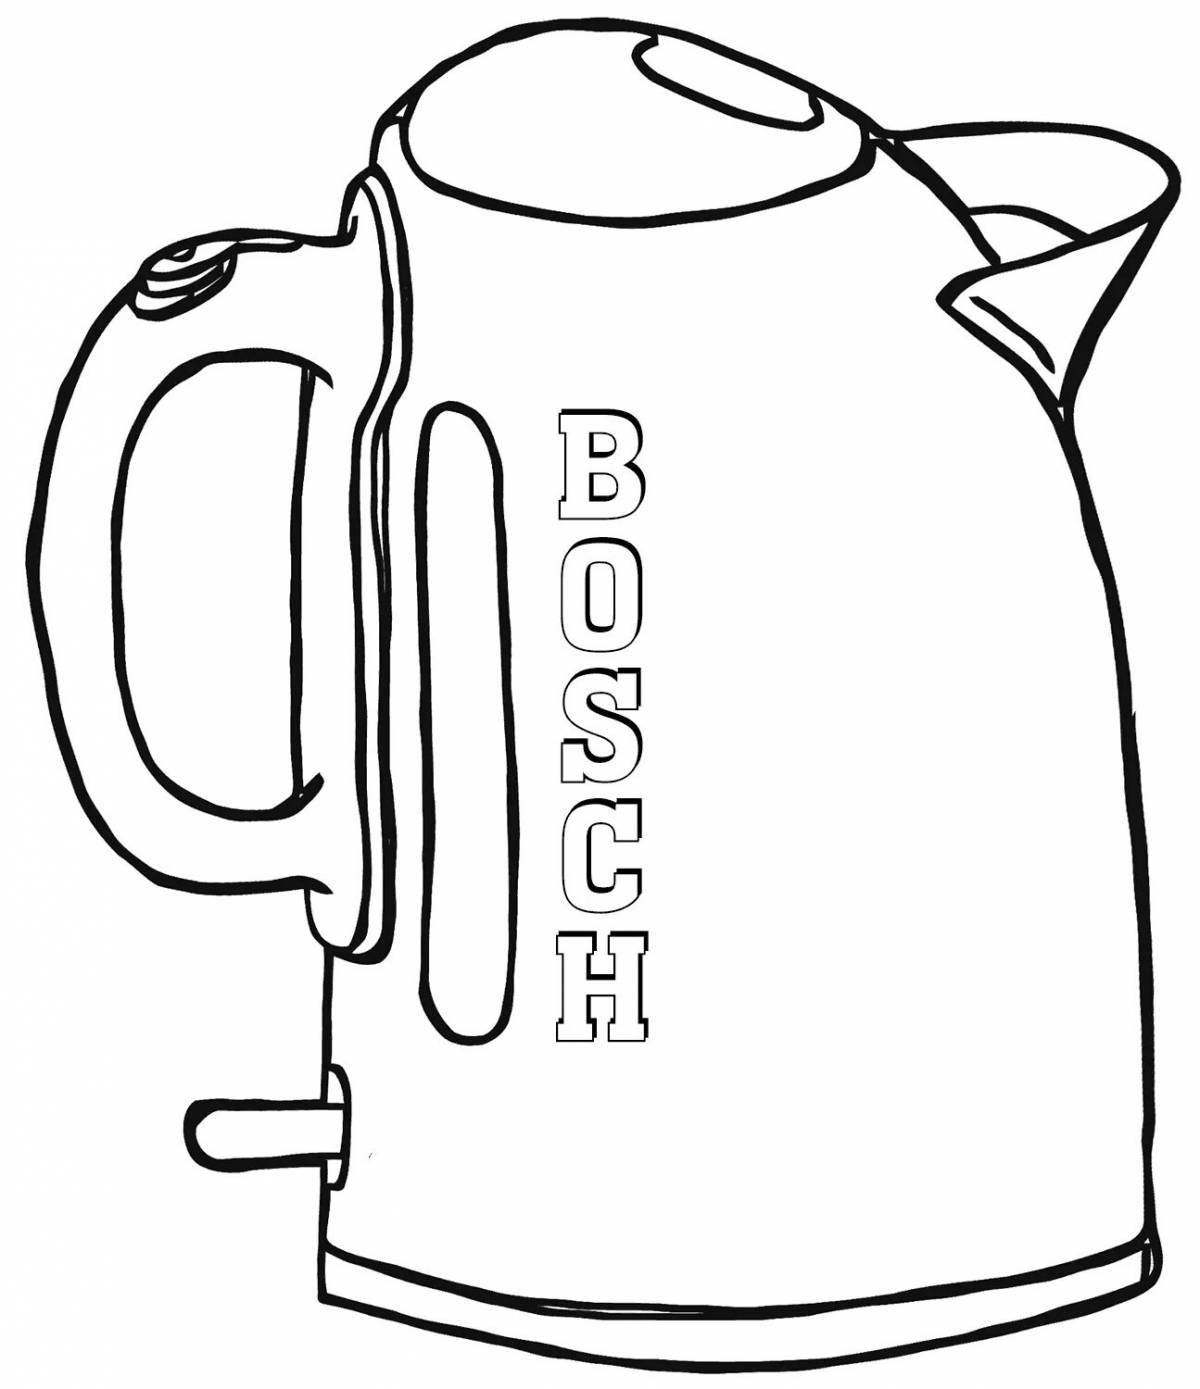 Adorable coloring book electric kettle for babies